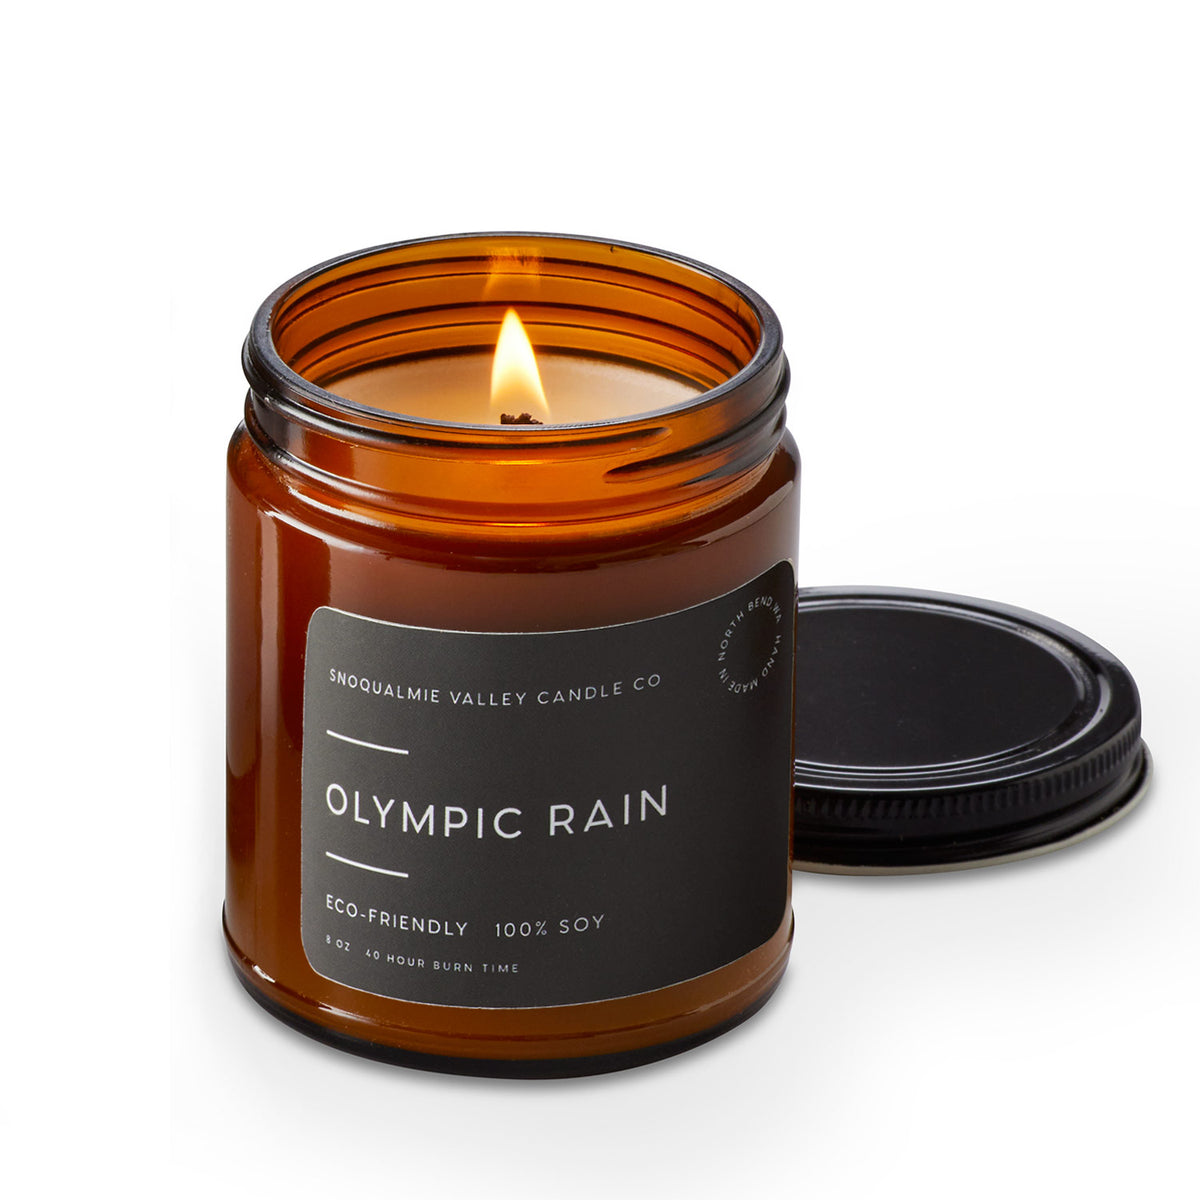 Snoqualmie Valley Candle Company Olympic Rain | Home & Gifts Seattle